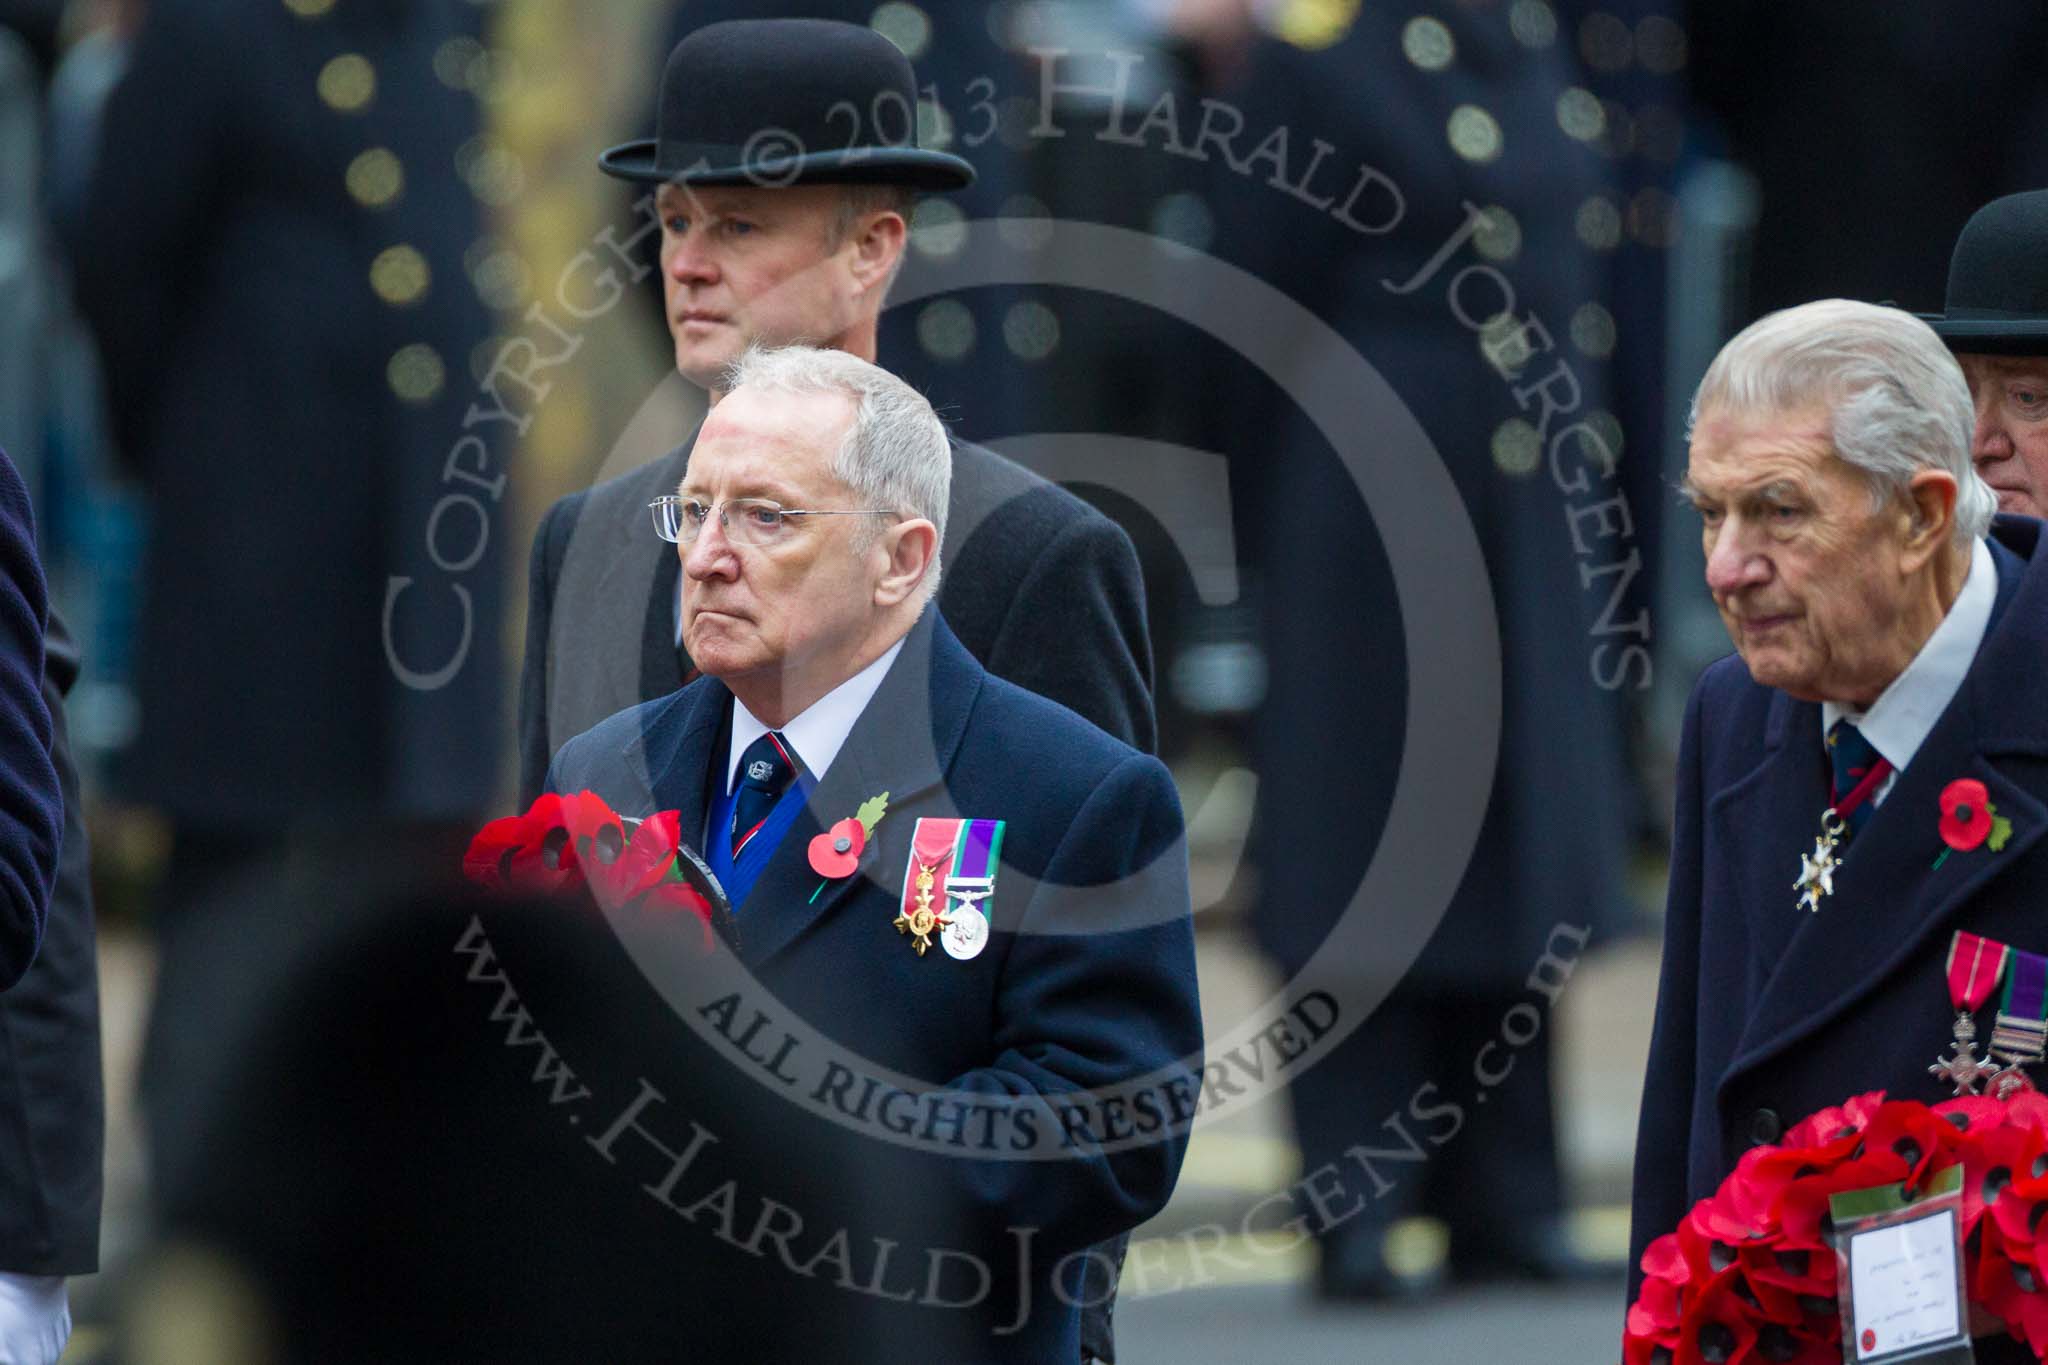 Remembrance Sunday at the Cenotaph 2015: Christopher Dovey, the national chairman of the Royal Naval Association, begind him Air Vice-Marshal David Whitaker, area president of the Royal Air Force Association. Image #335, 08 November 2015 11:25 Whitehall, London, UK